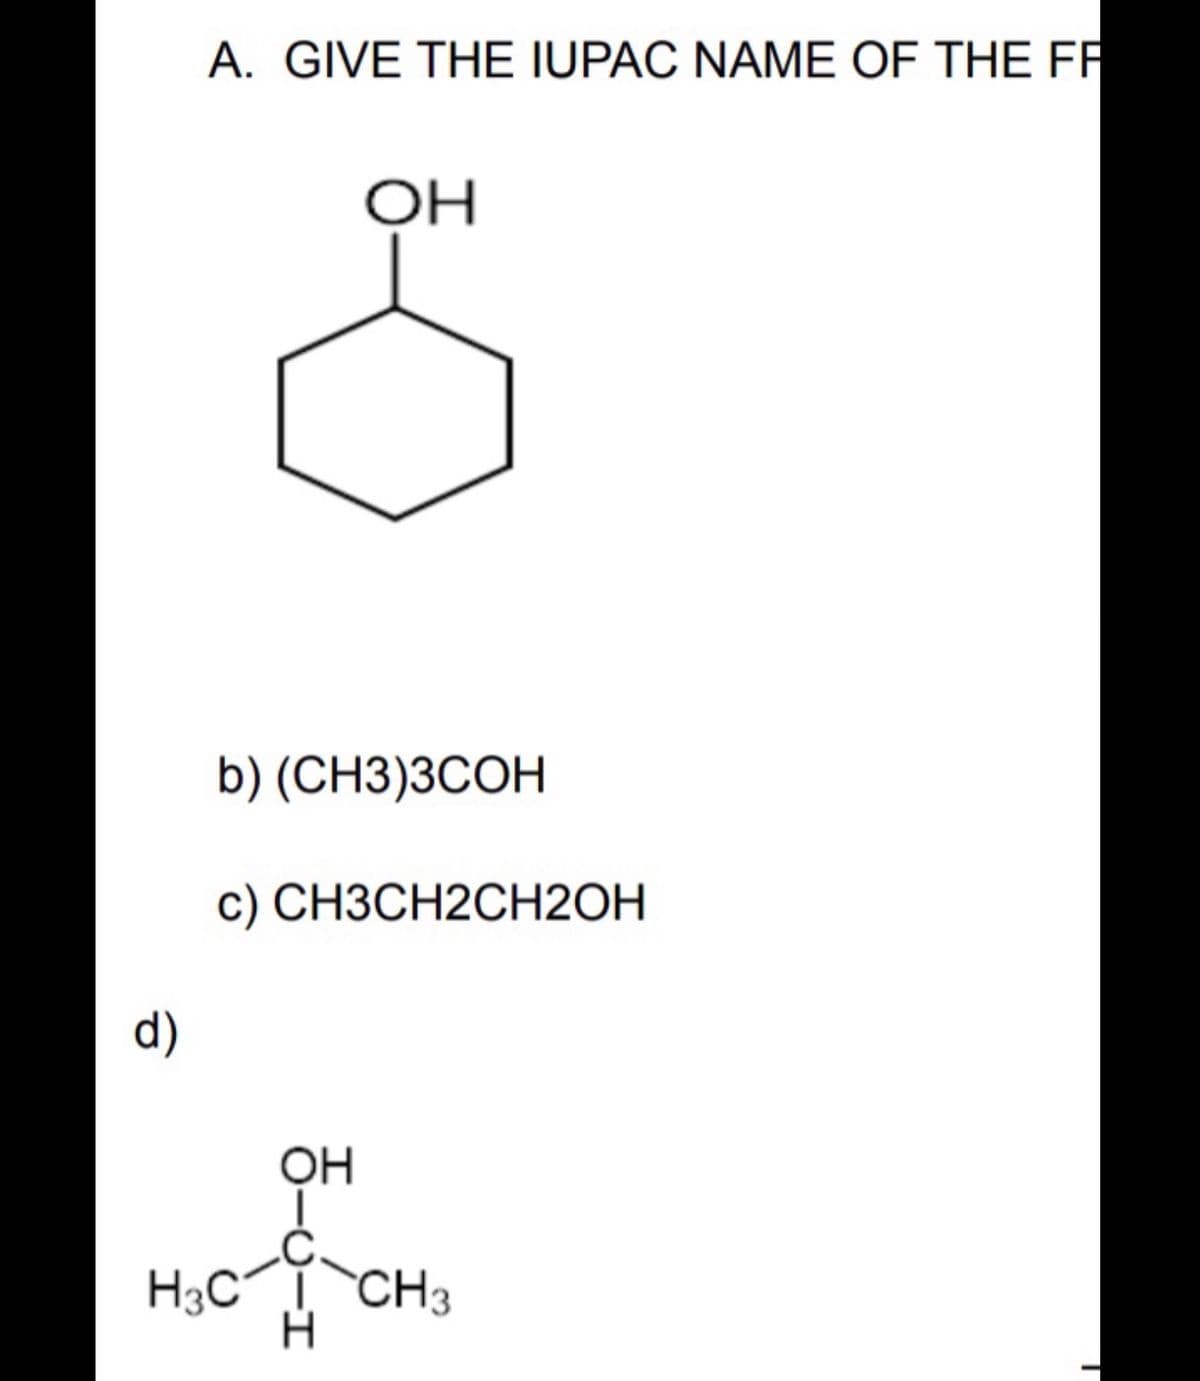 A. GIVE THE IUPAC NAME OF THE FR
ОН
b) (CH3)3СОН
с) СНЗСН2СH2ОН
d)
OH
.C.
H3C CH3
H.
